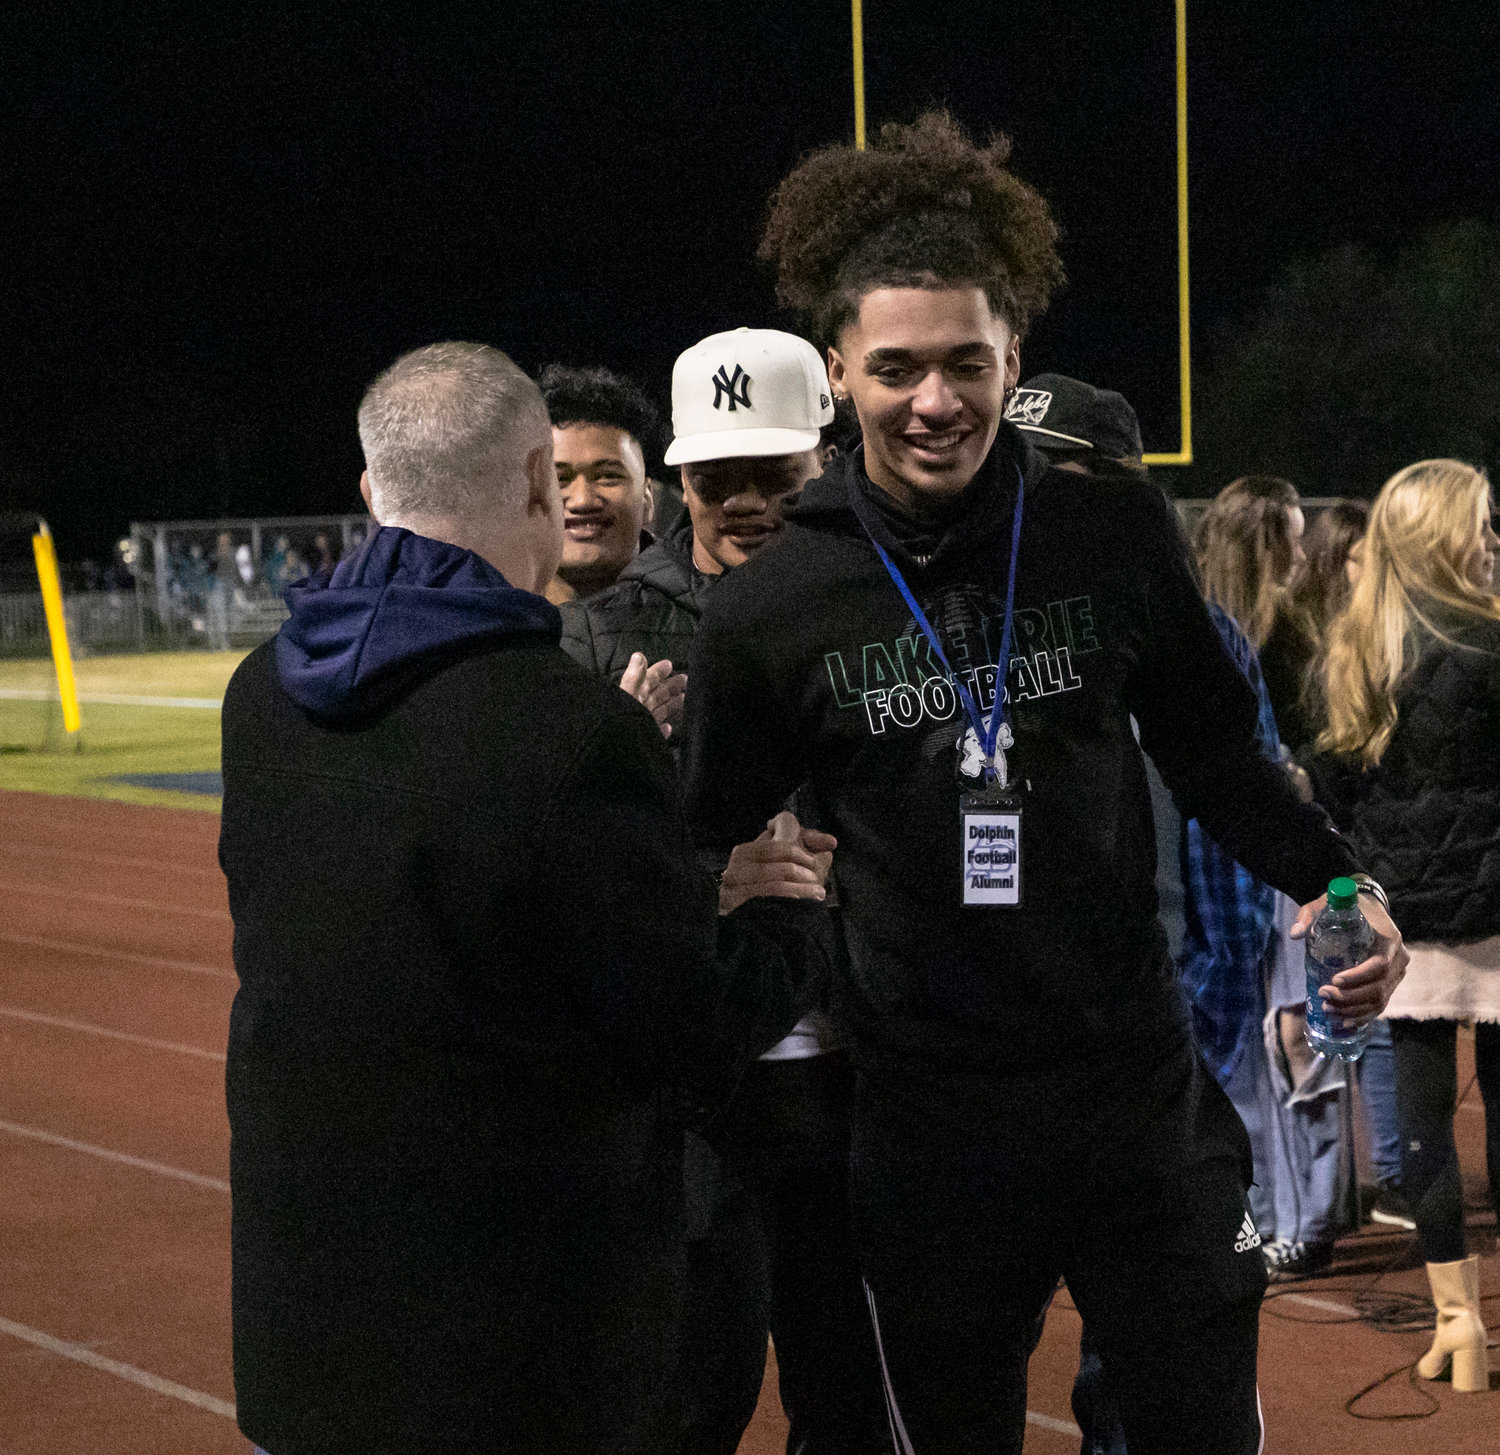 Taevon Anderson, a member of Gulf Shores High School’s Class of 2022, embraces Dolphin athletic director Kevin Tubbs after former players were recognized before Nov. 18’s state quarterfinal playoff game between the Gulf Shores Dolphins and Faith Academy Rams at the Sportsplex.